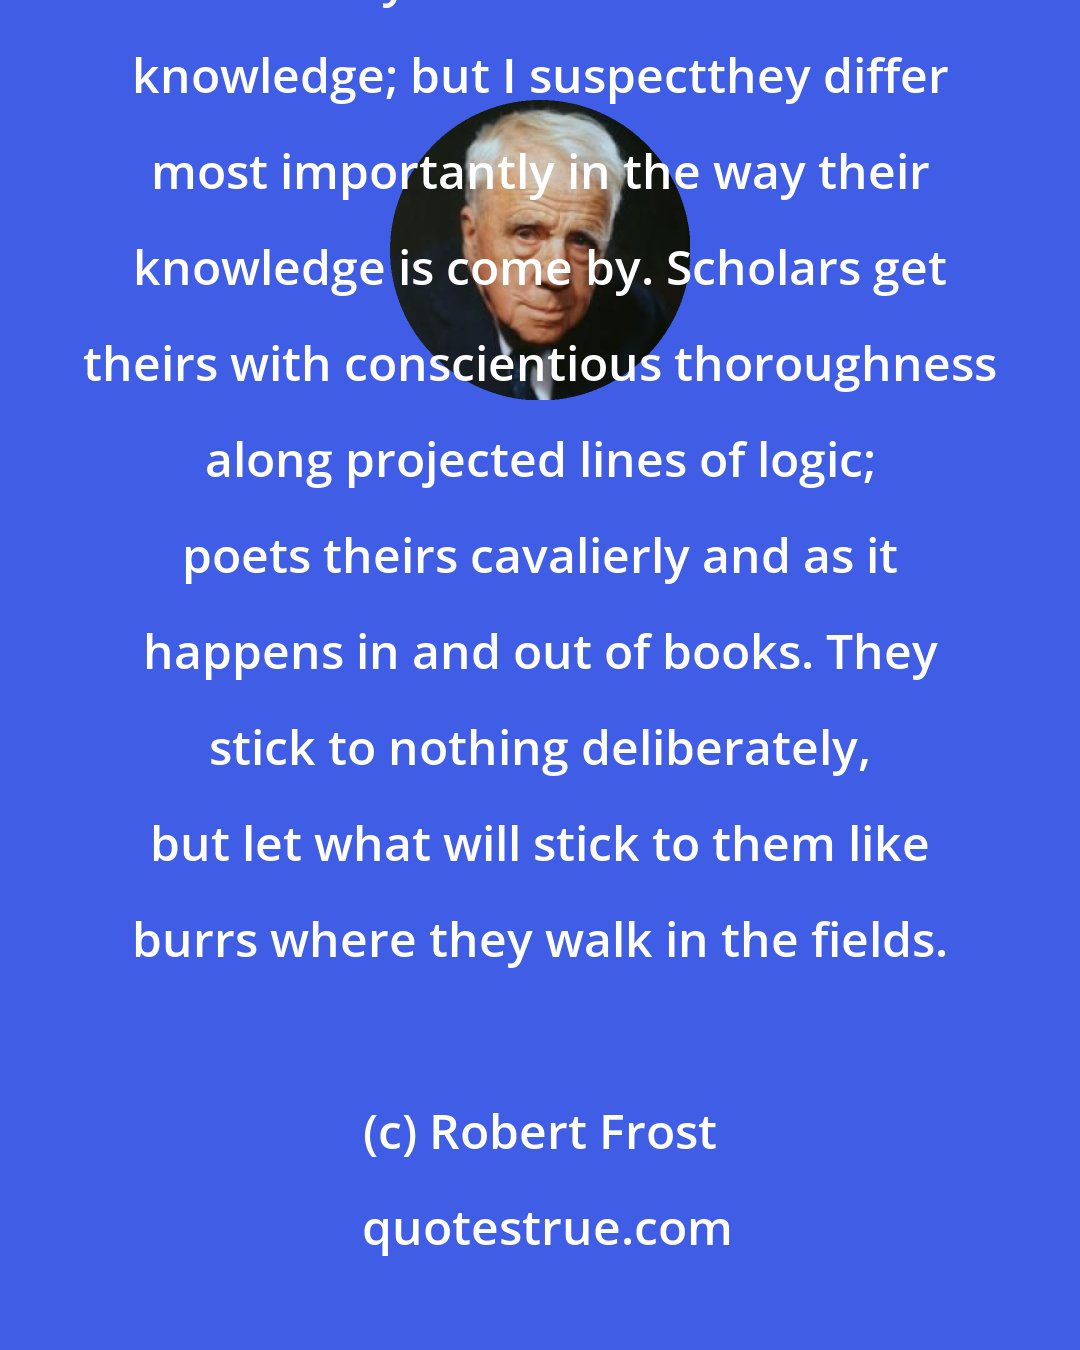 Robert Frost: Scholars and artists thrown together are often annoyed at the puzzle of where they differ. Both work from knowledge; but I suspectthey differ most importantly in the way their knowledge is come by. Scholars get theirs with conscientious thoroughness along projected lines of logic; poets theirs cavalierly and as it happens in and out of books. They stick to nothing deliberately, but let what will stick to them like burrs where they walk in the fields.